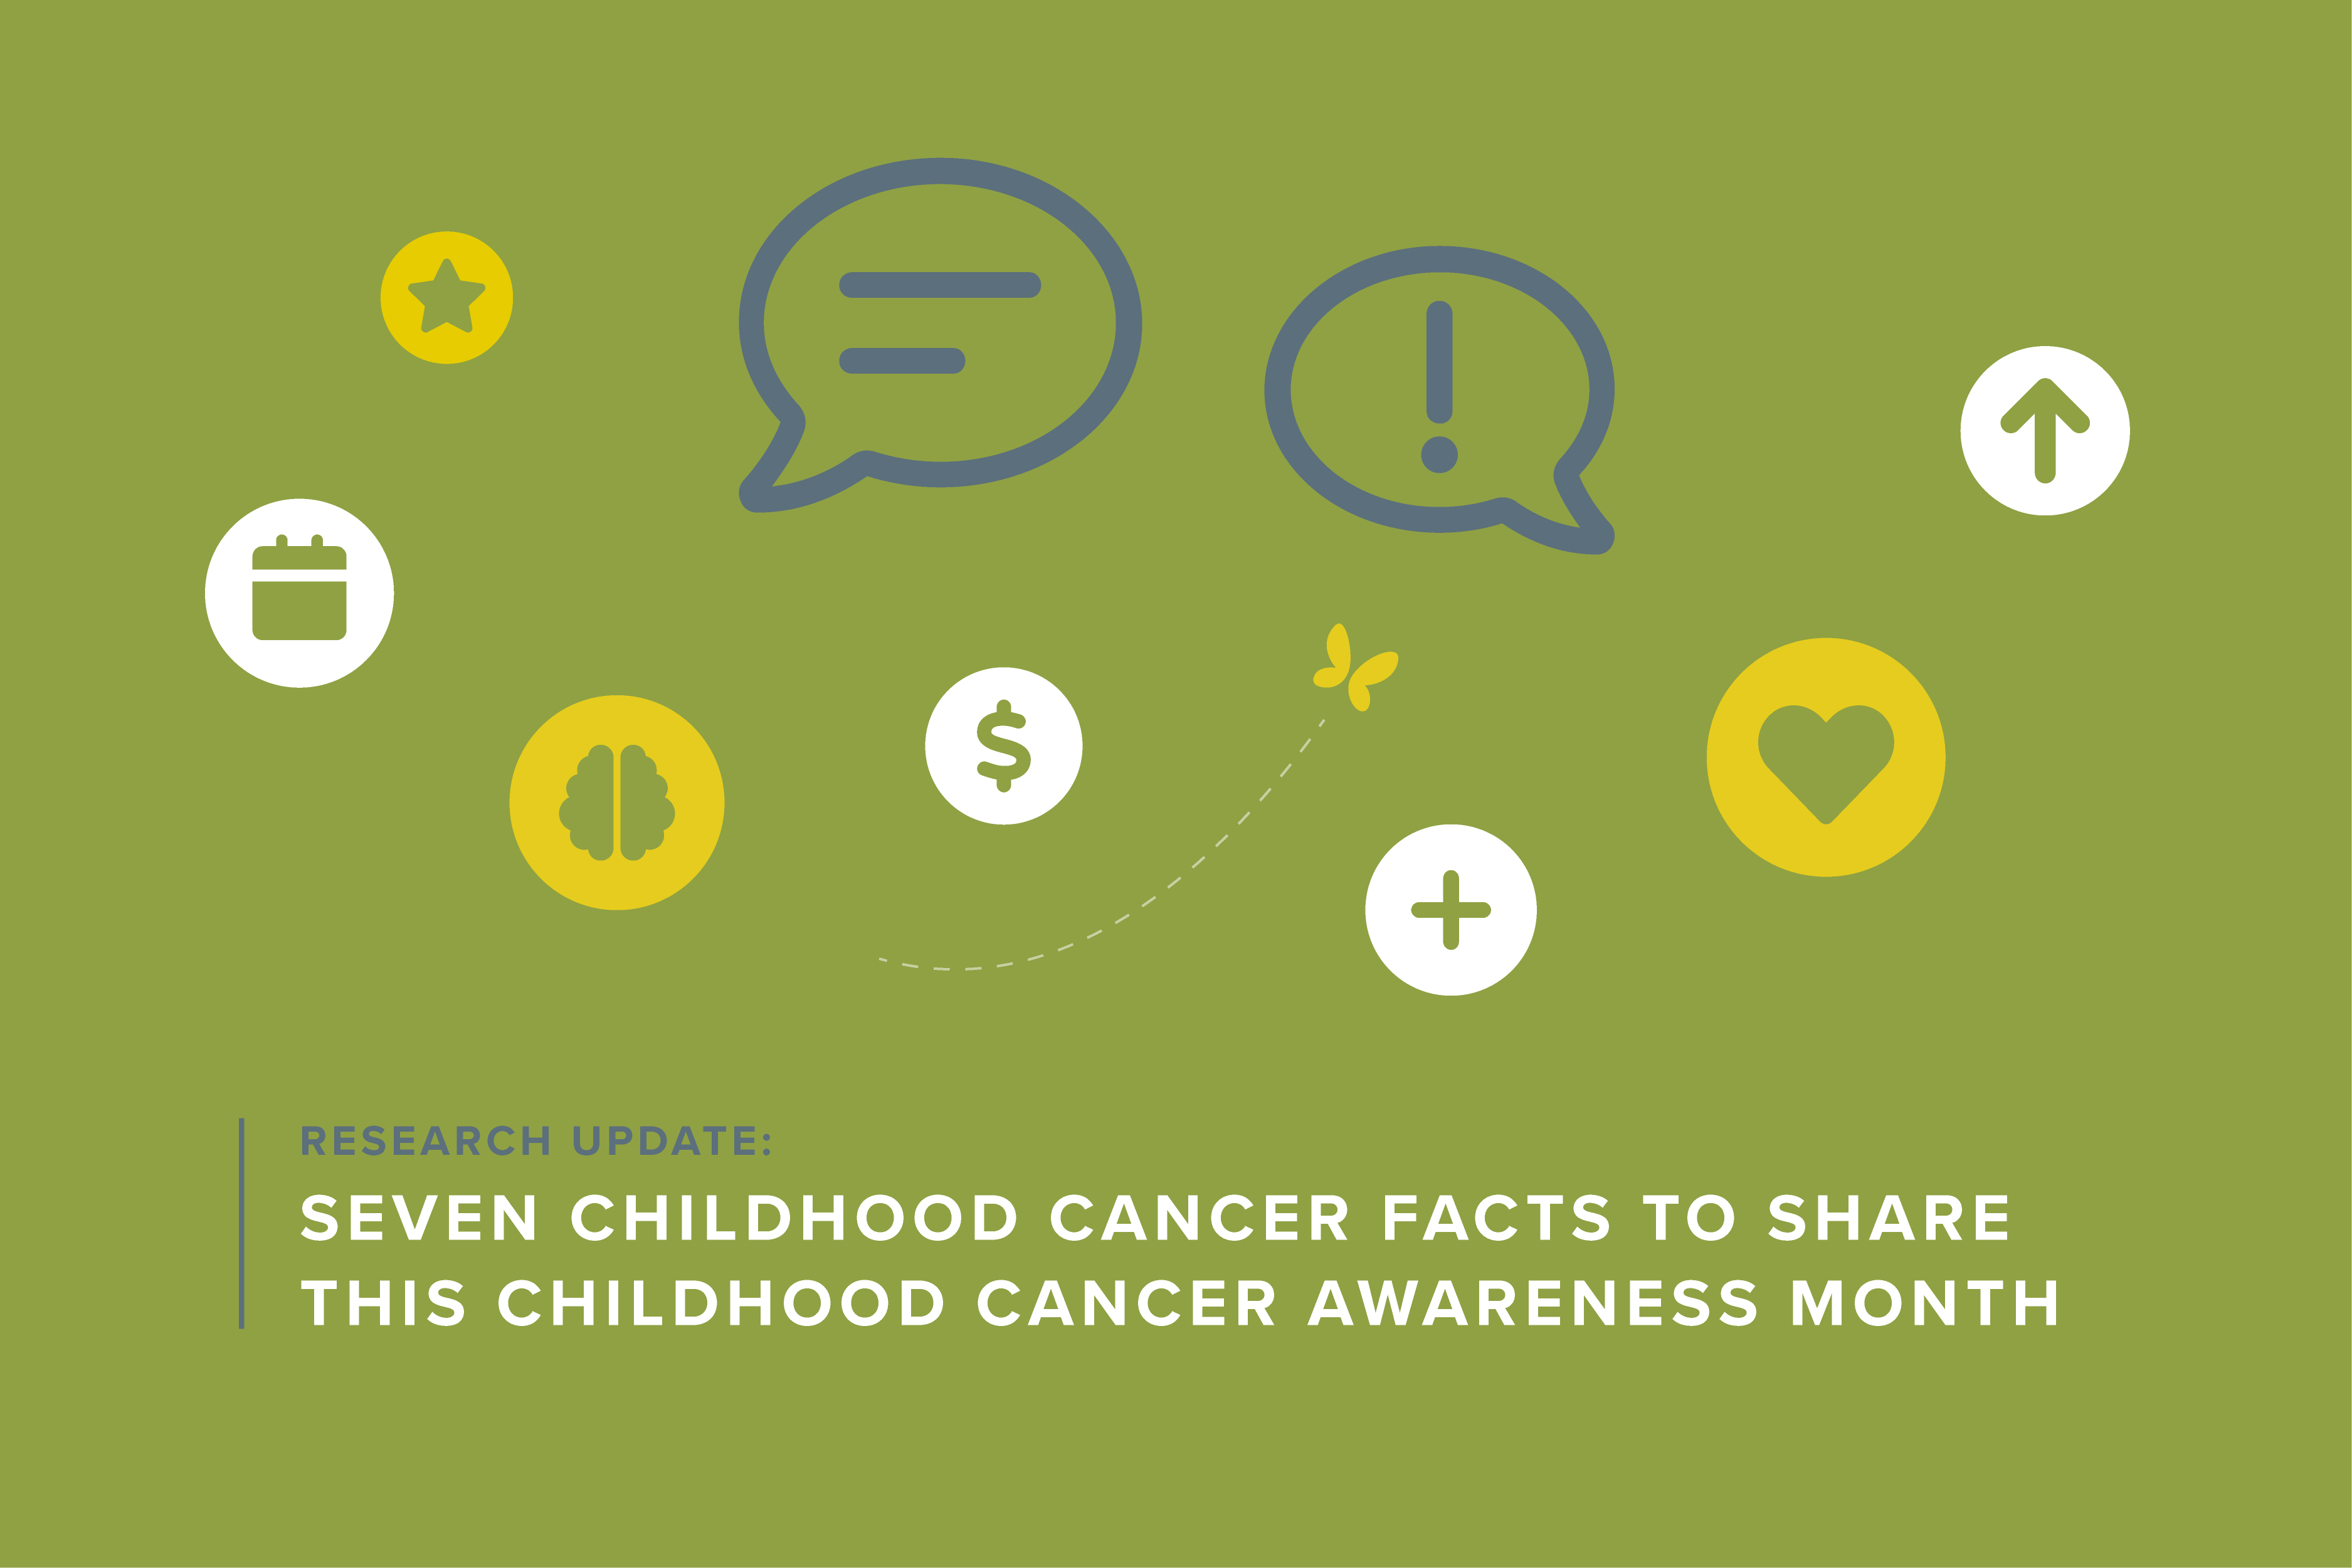 Seven childhood cancer facts to share this Childhood Cancer Awareness Month  - Children's Cancer Research Fund